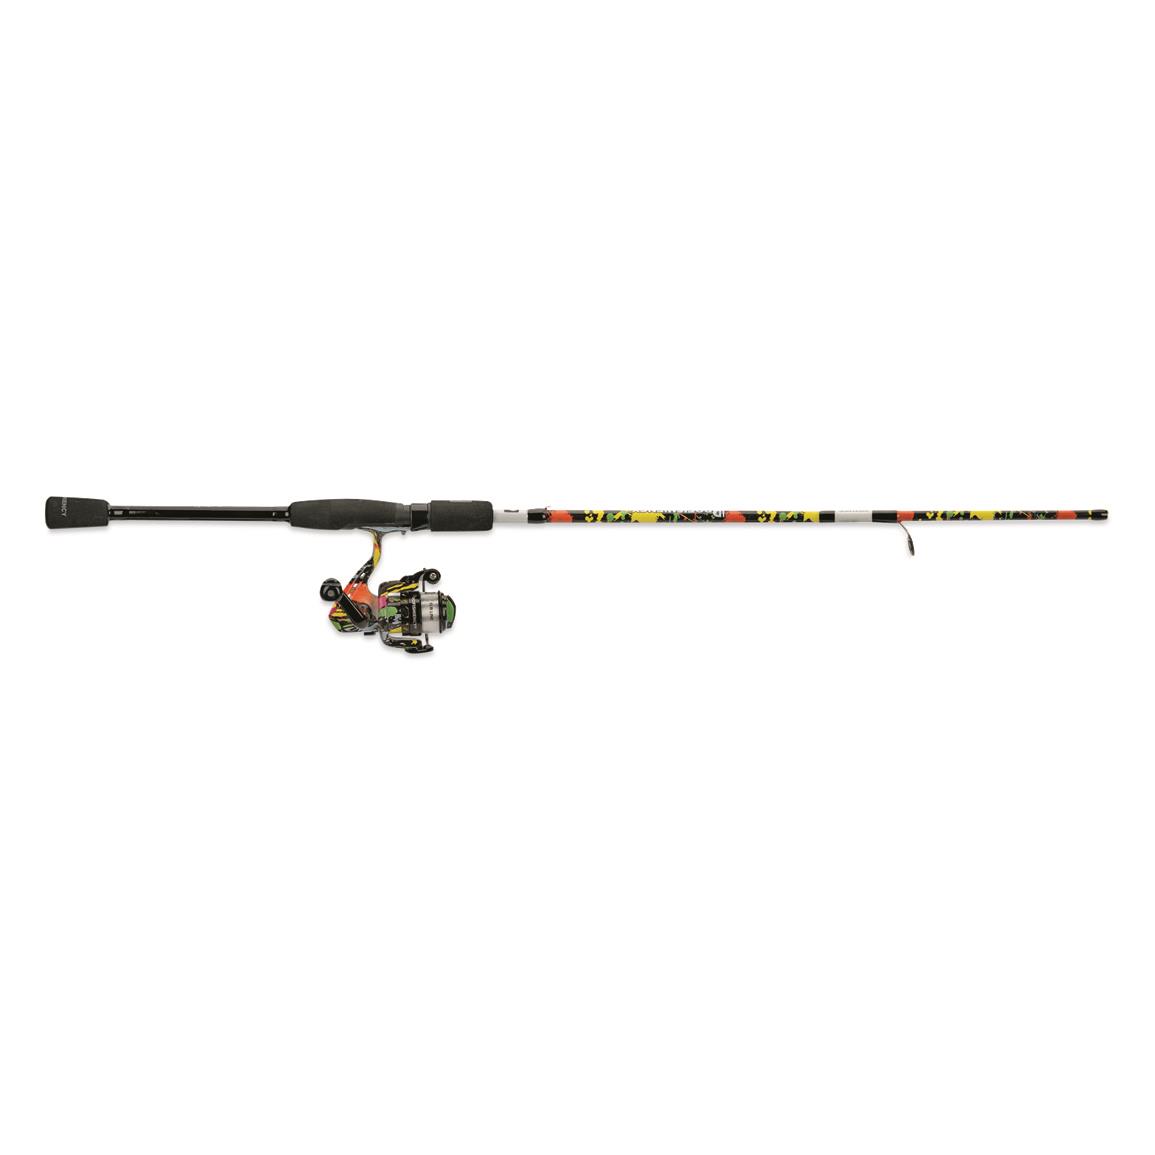 ProFISHiency Splat 5'6 Medium Light Spinning Combo with Lure Kit, 5.2:1  Gear Ratio - 734010, Spinning Combos at Sportsman's Guide